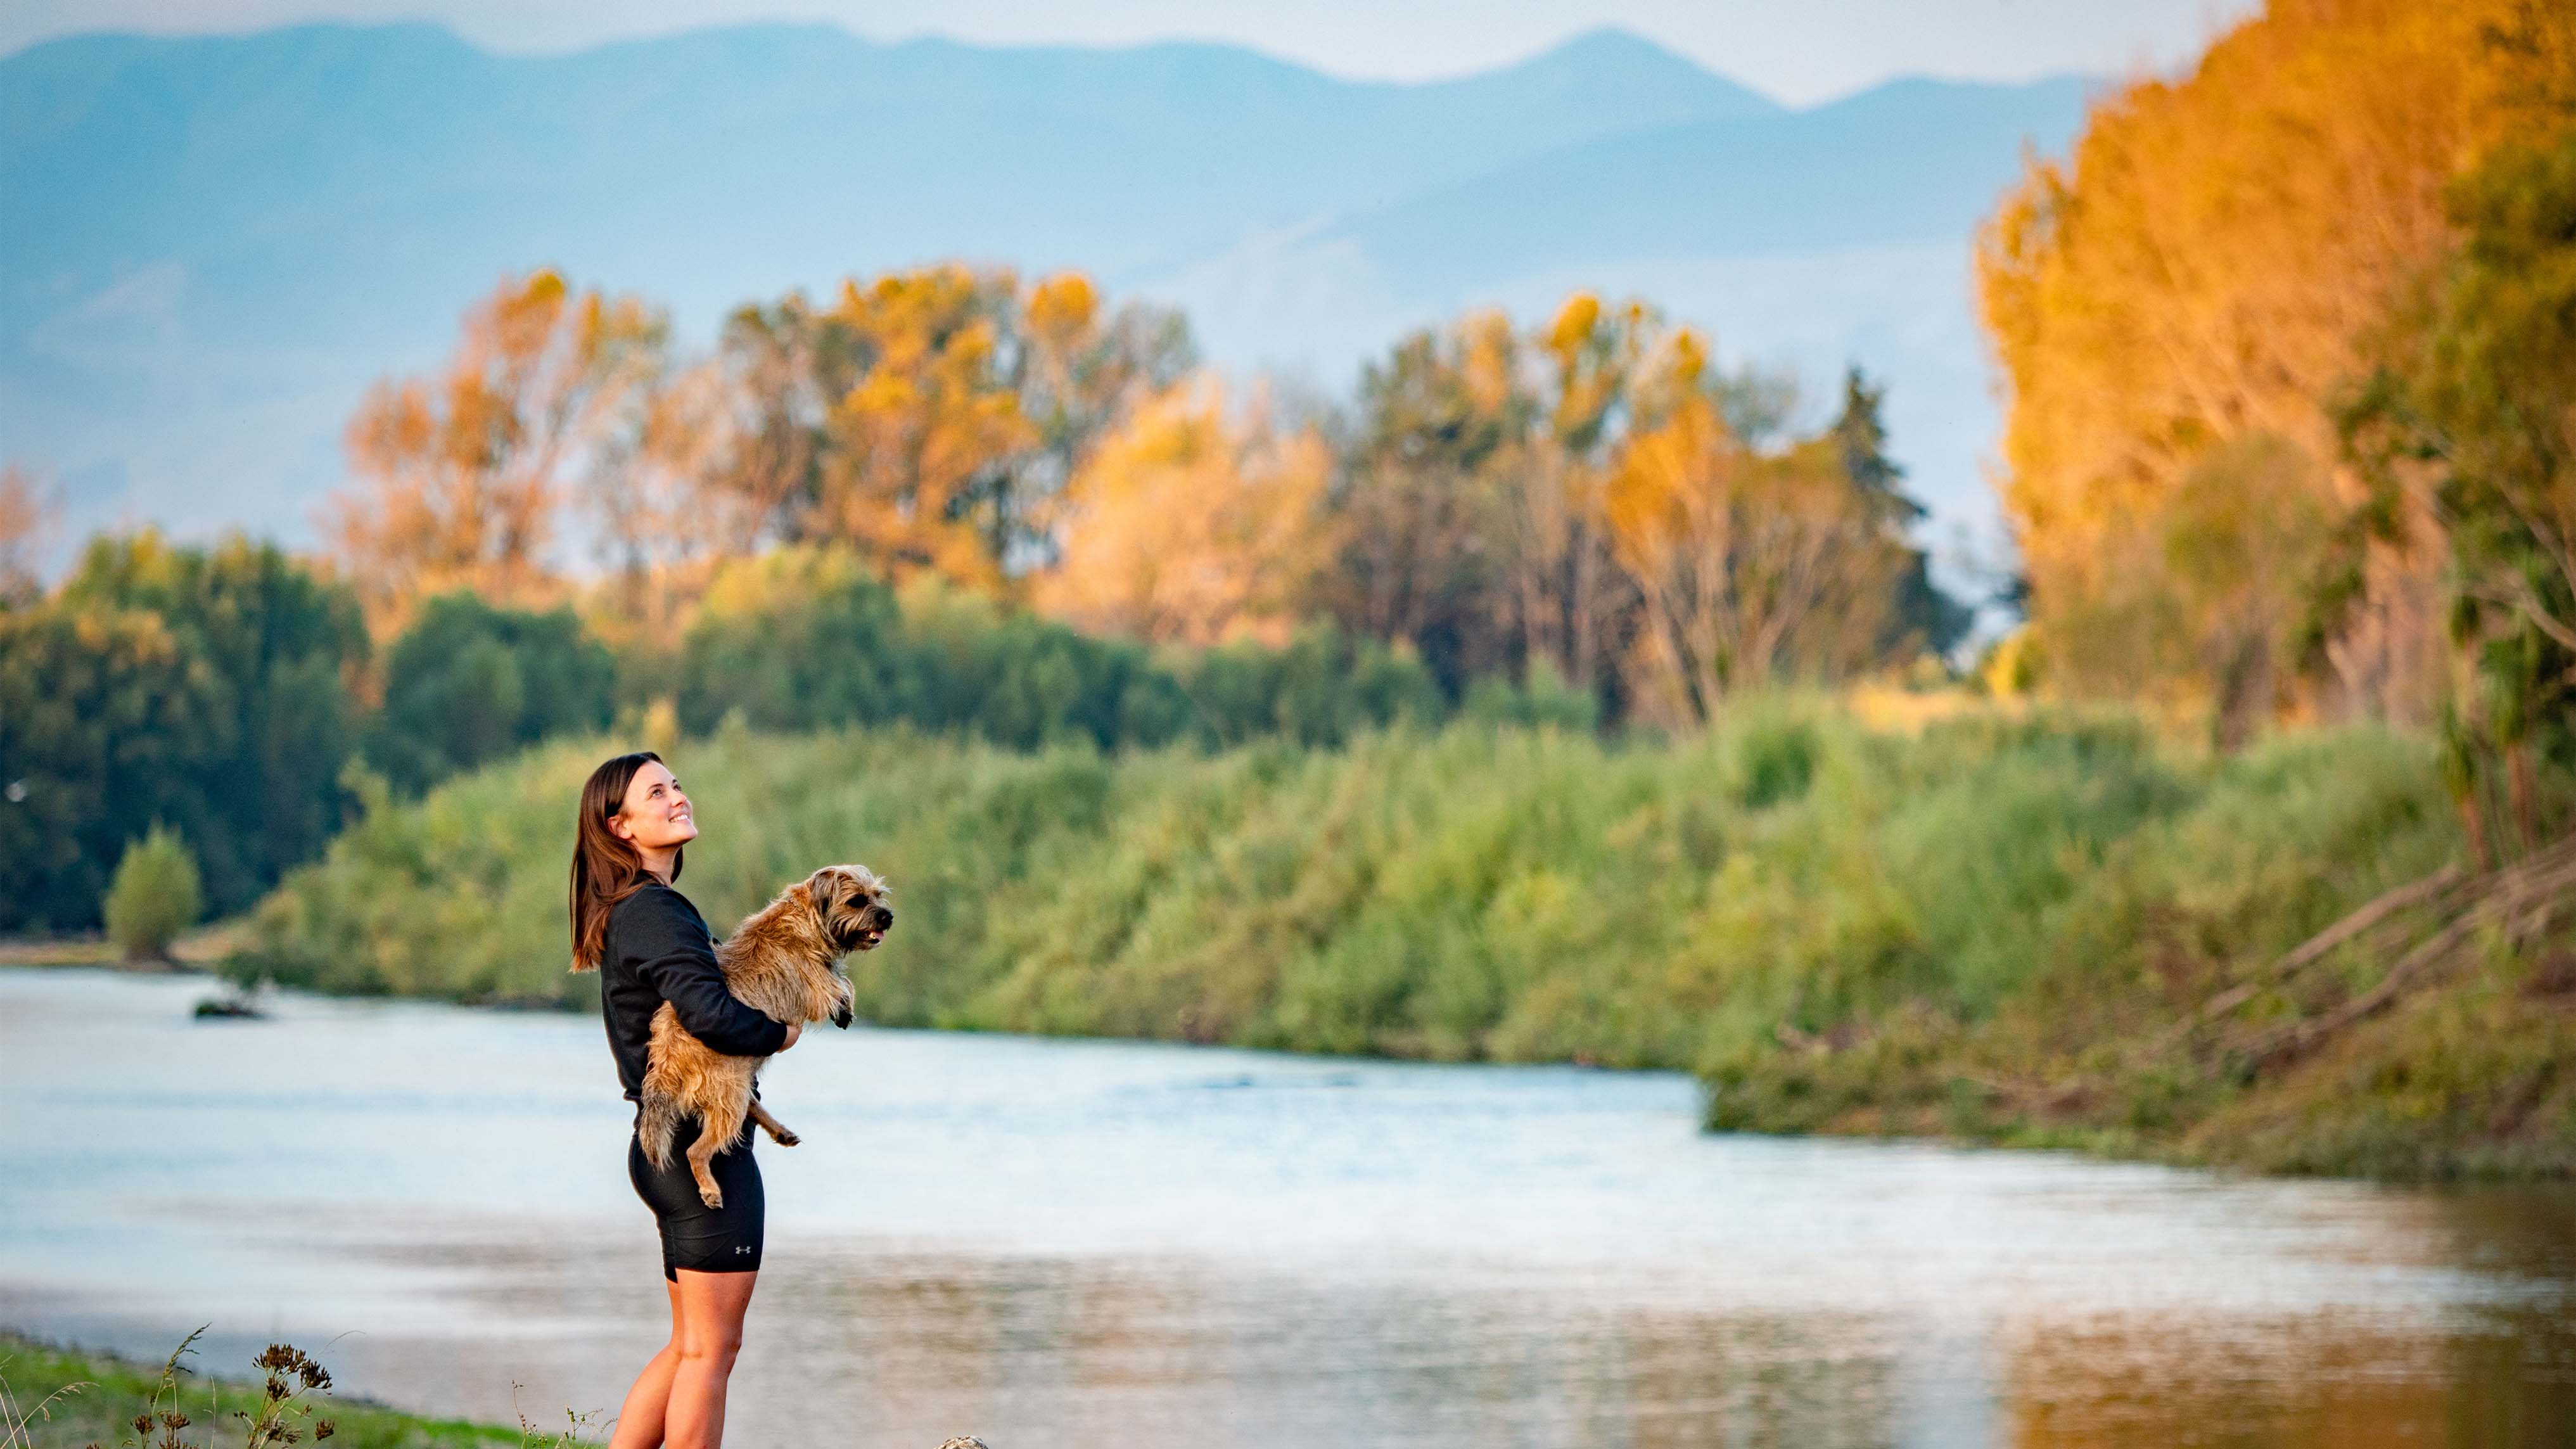 A woman standing on the pathway next to the riverbank, holding a small shaggy dog and gazing out over the water to the trees on the opposite bank.